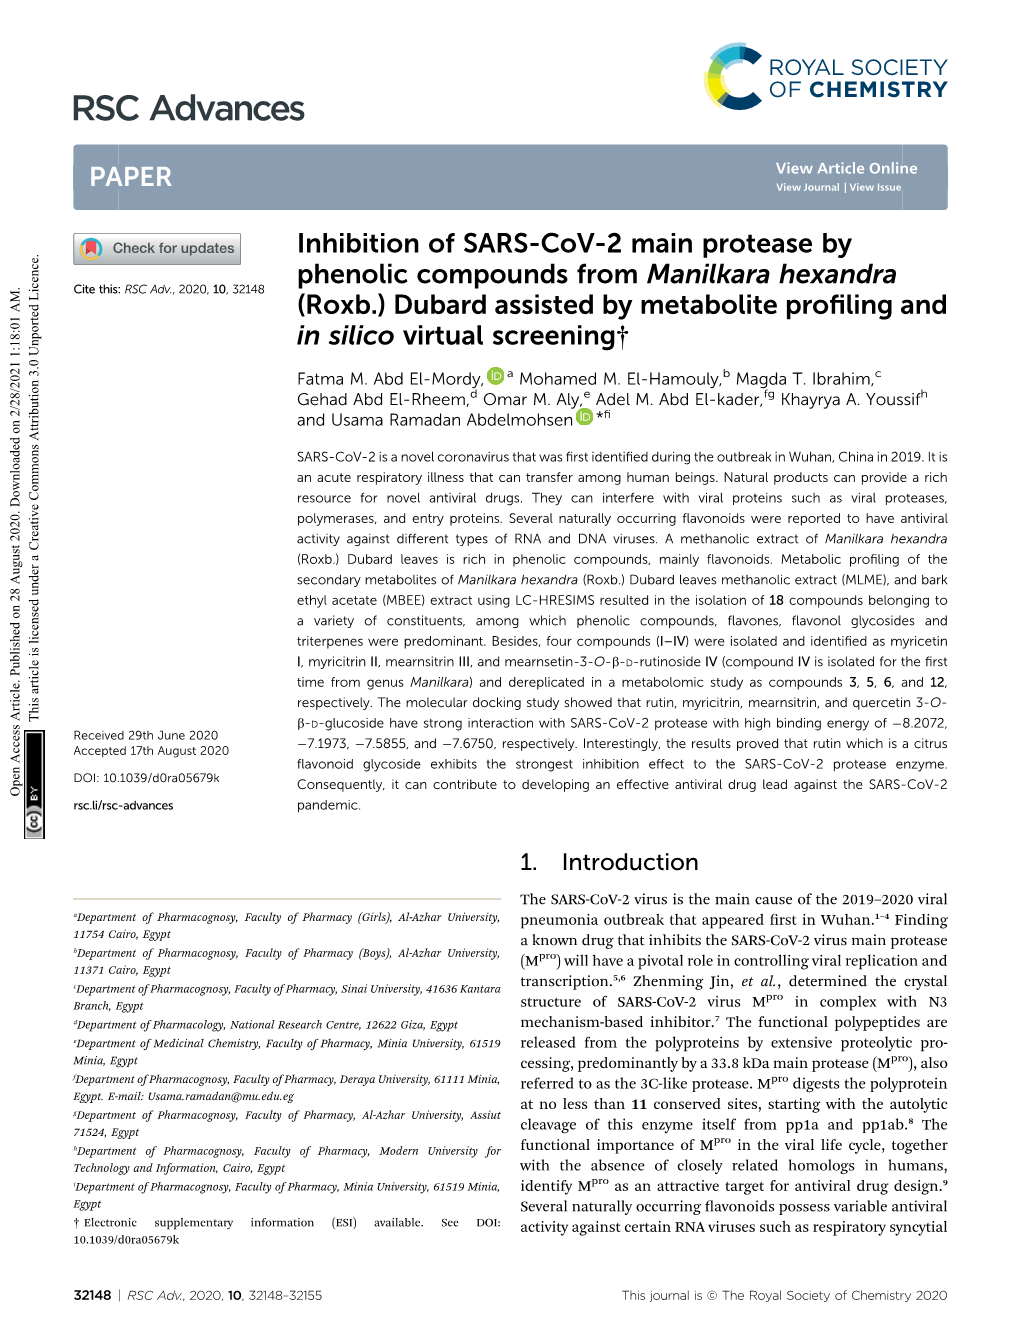 Inhibition of SARS-Cov-2 Main Protease by Phenolic Compounds